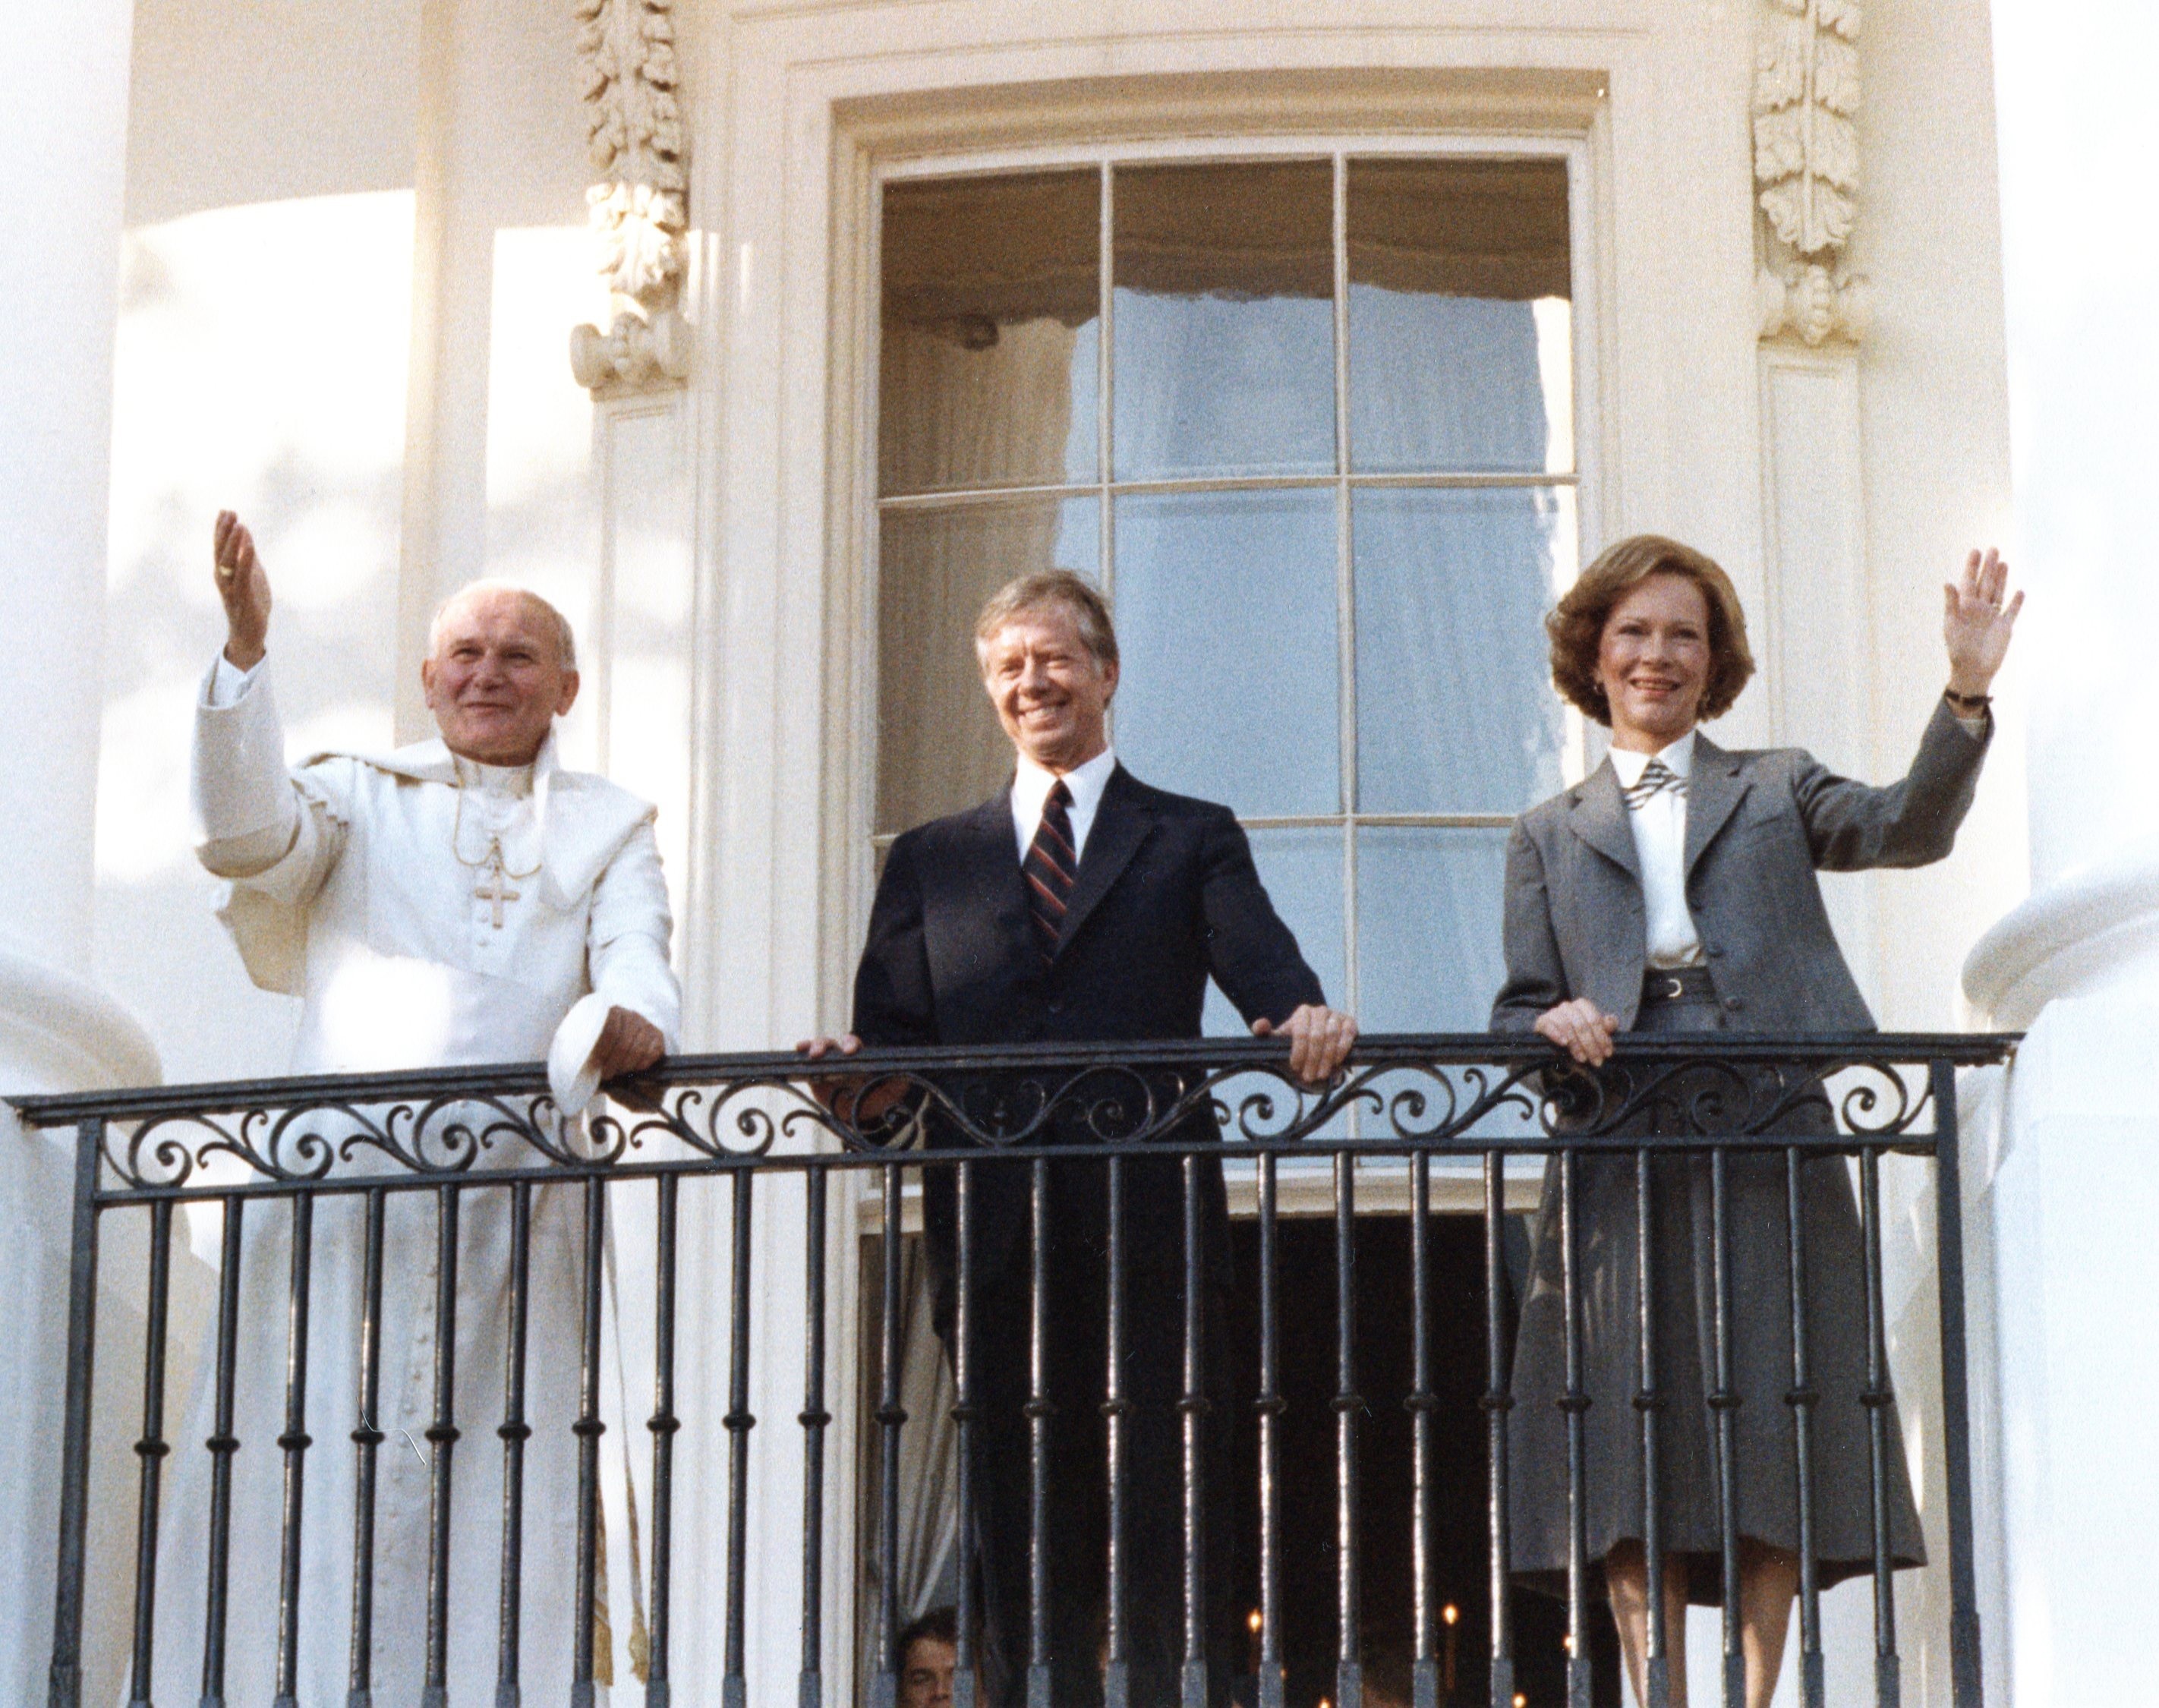 President Jimmy Carter and First Lady Rosalynn Carter with Pope John Paul II at the White House on October 6, 1979. (Photo: Carter Archives/Newscom)